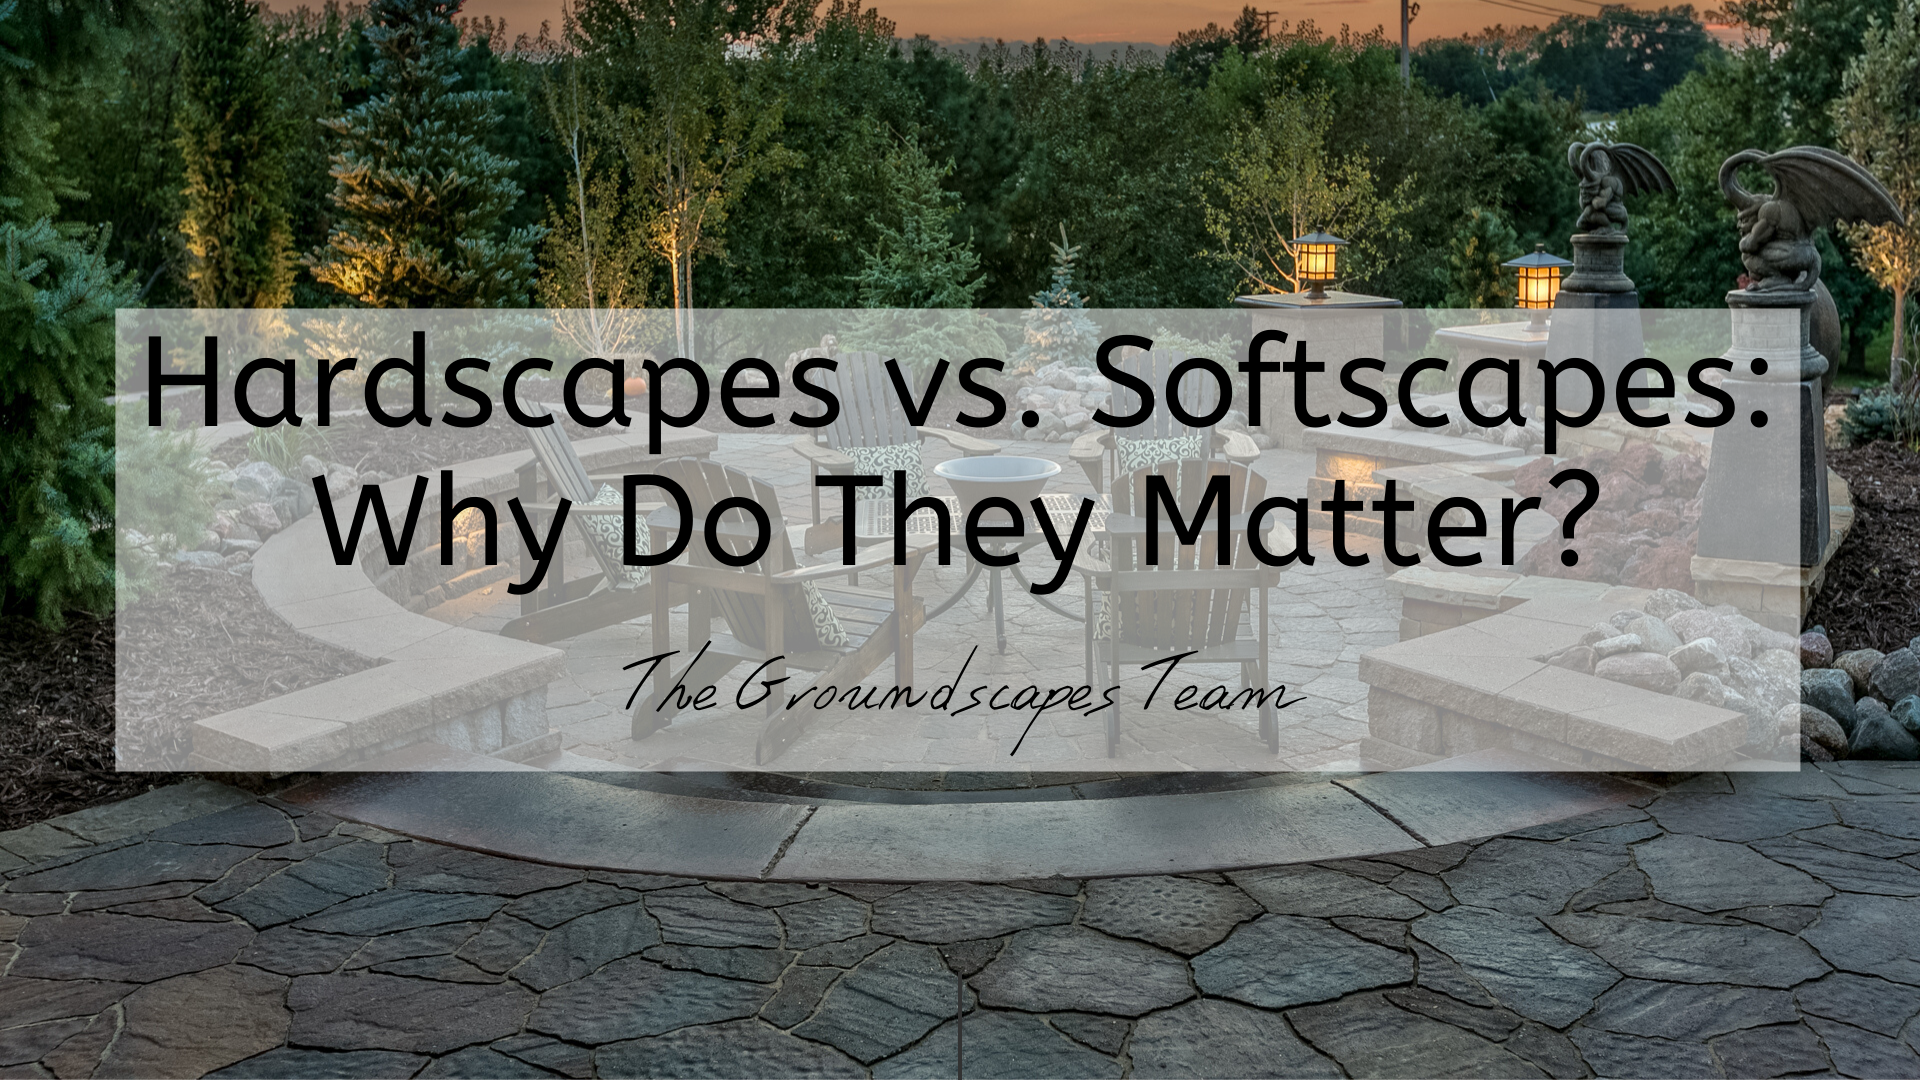 Hardscapes vs. Softscapes: Why Do They Matter?